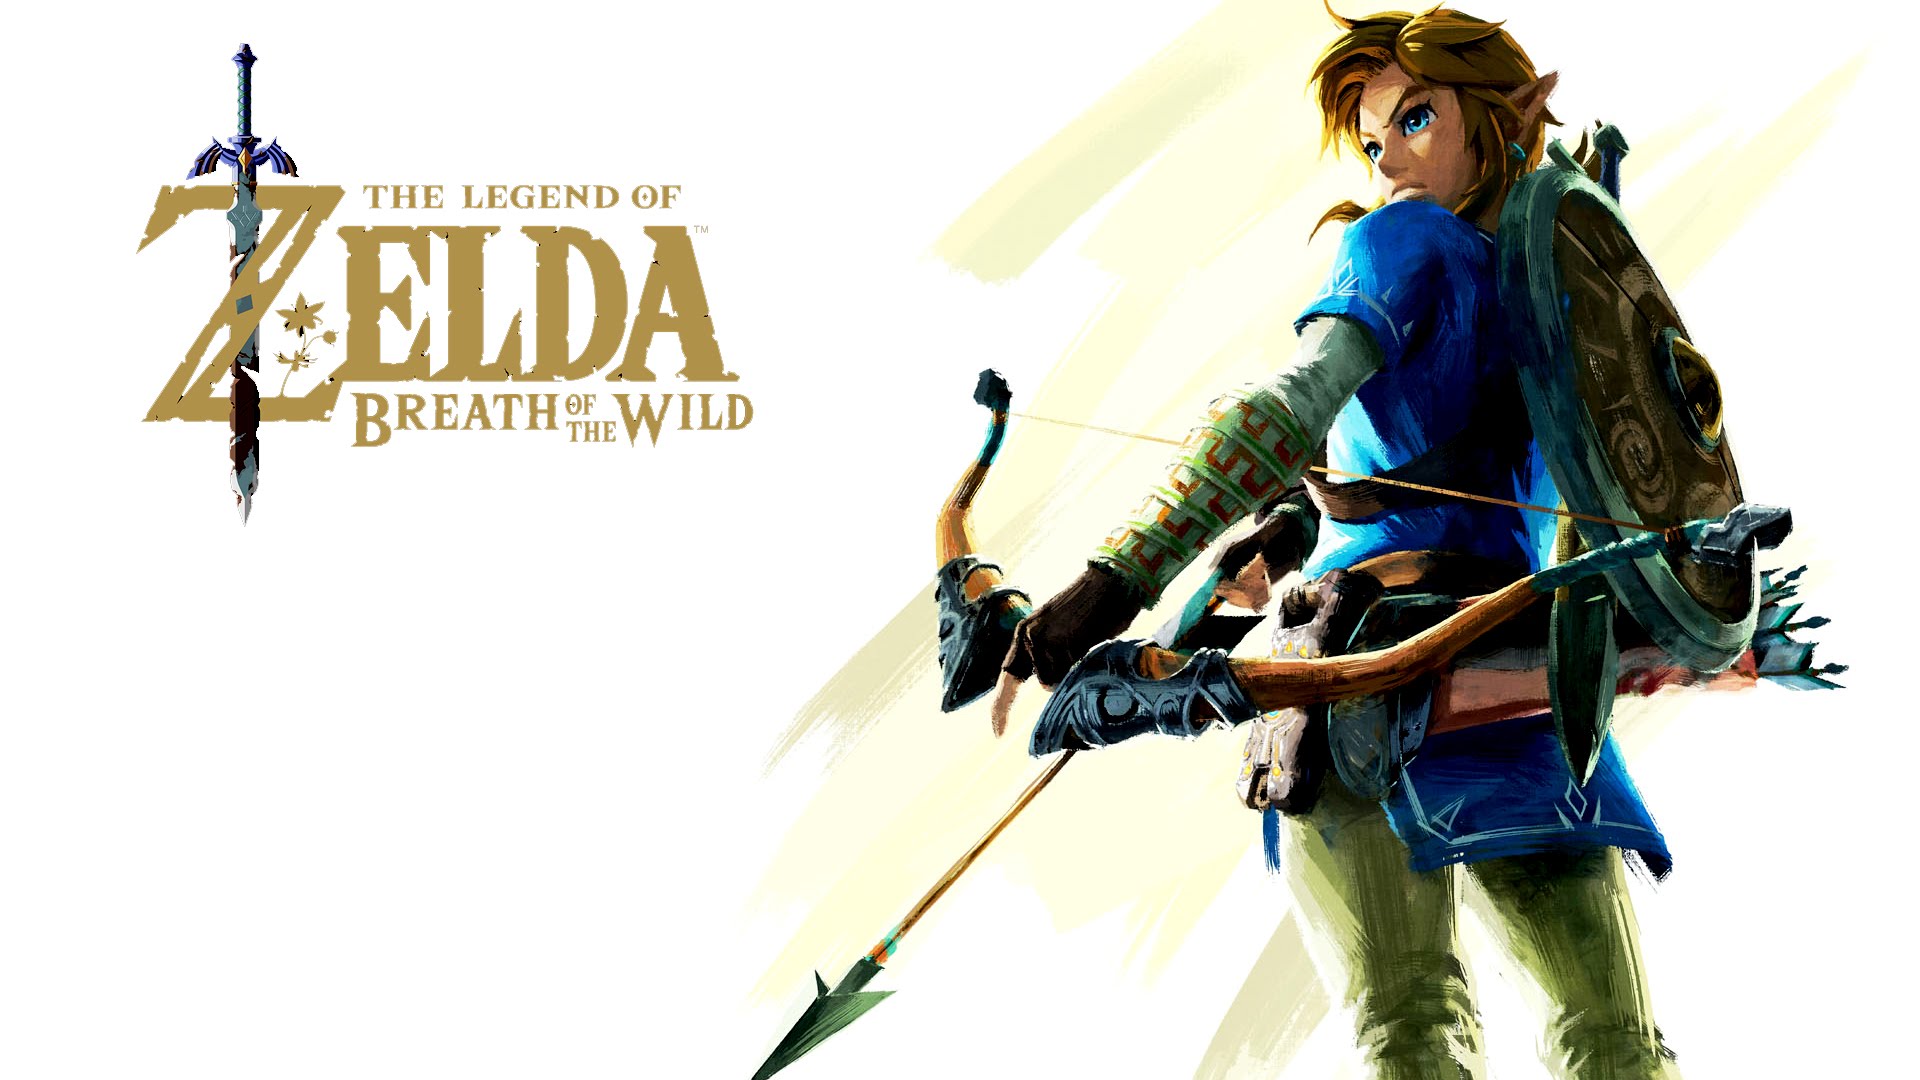 The Legend of Zelda: Breath of the Wild available on June 16, first on Switch (rumor)